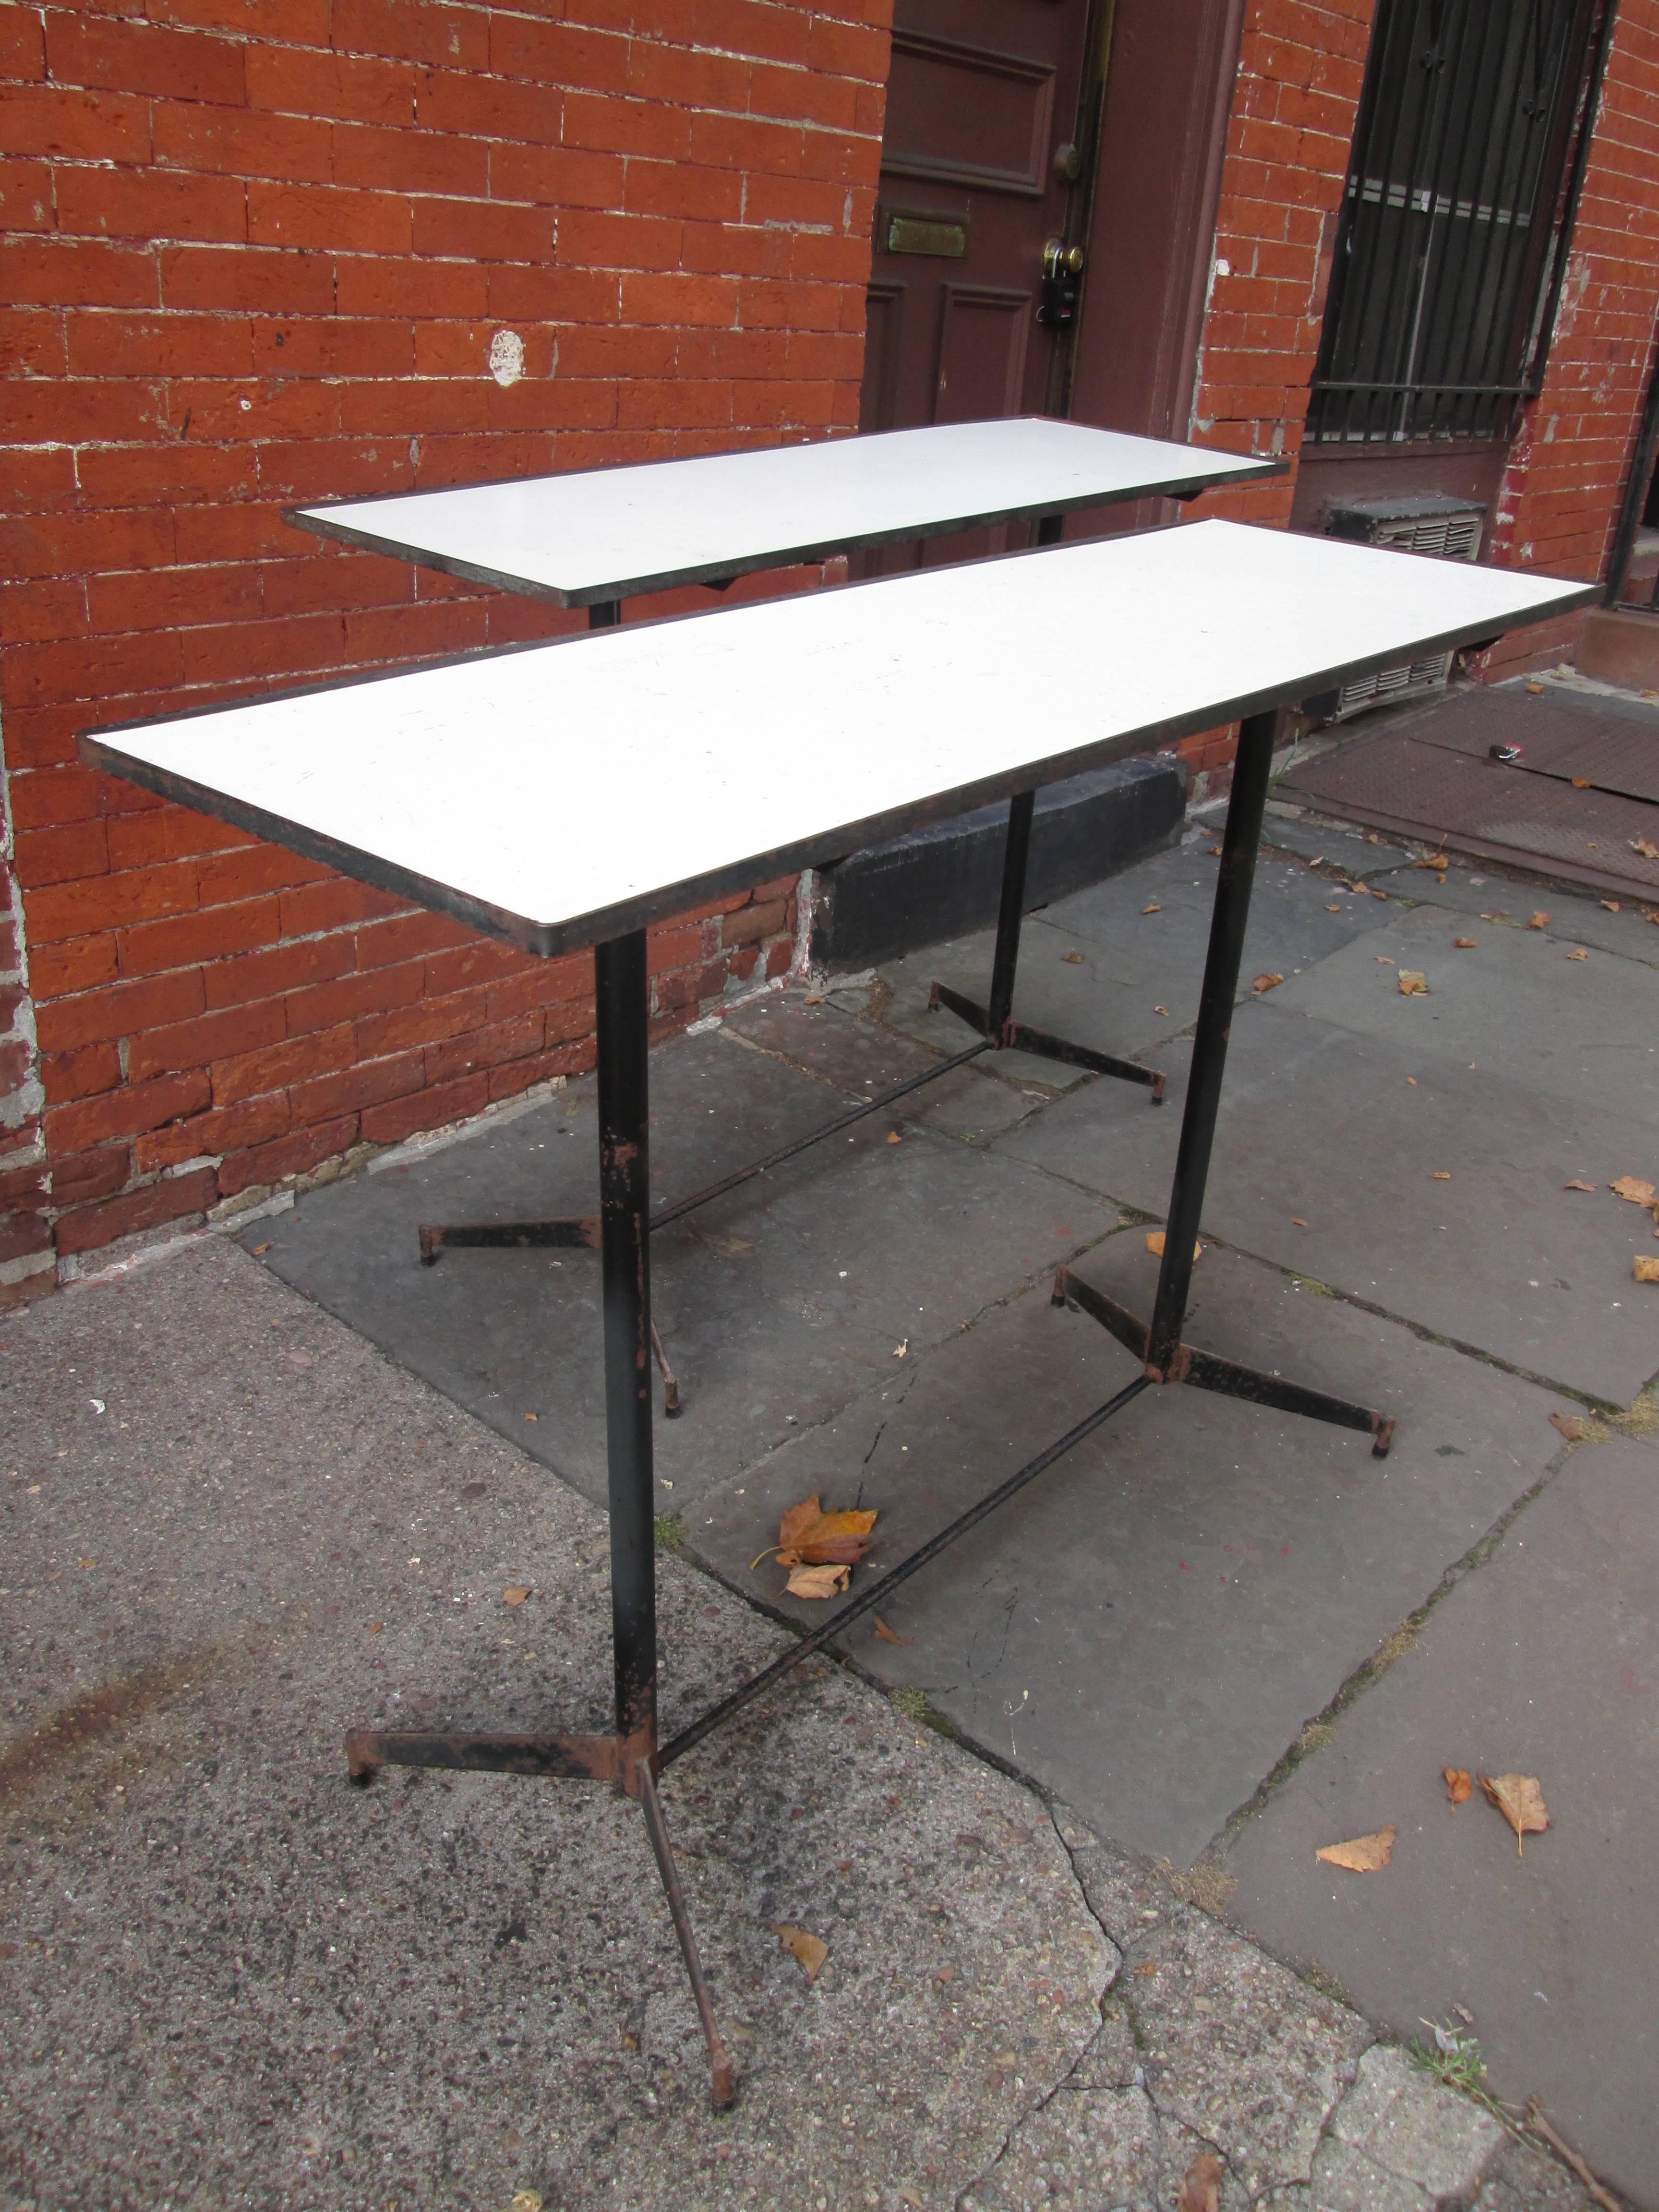 Two rectangular tables with iron frames and composite board surfaces.